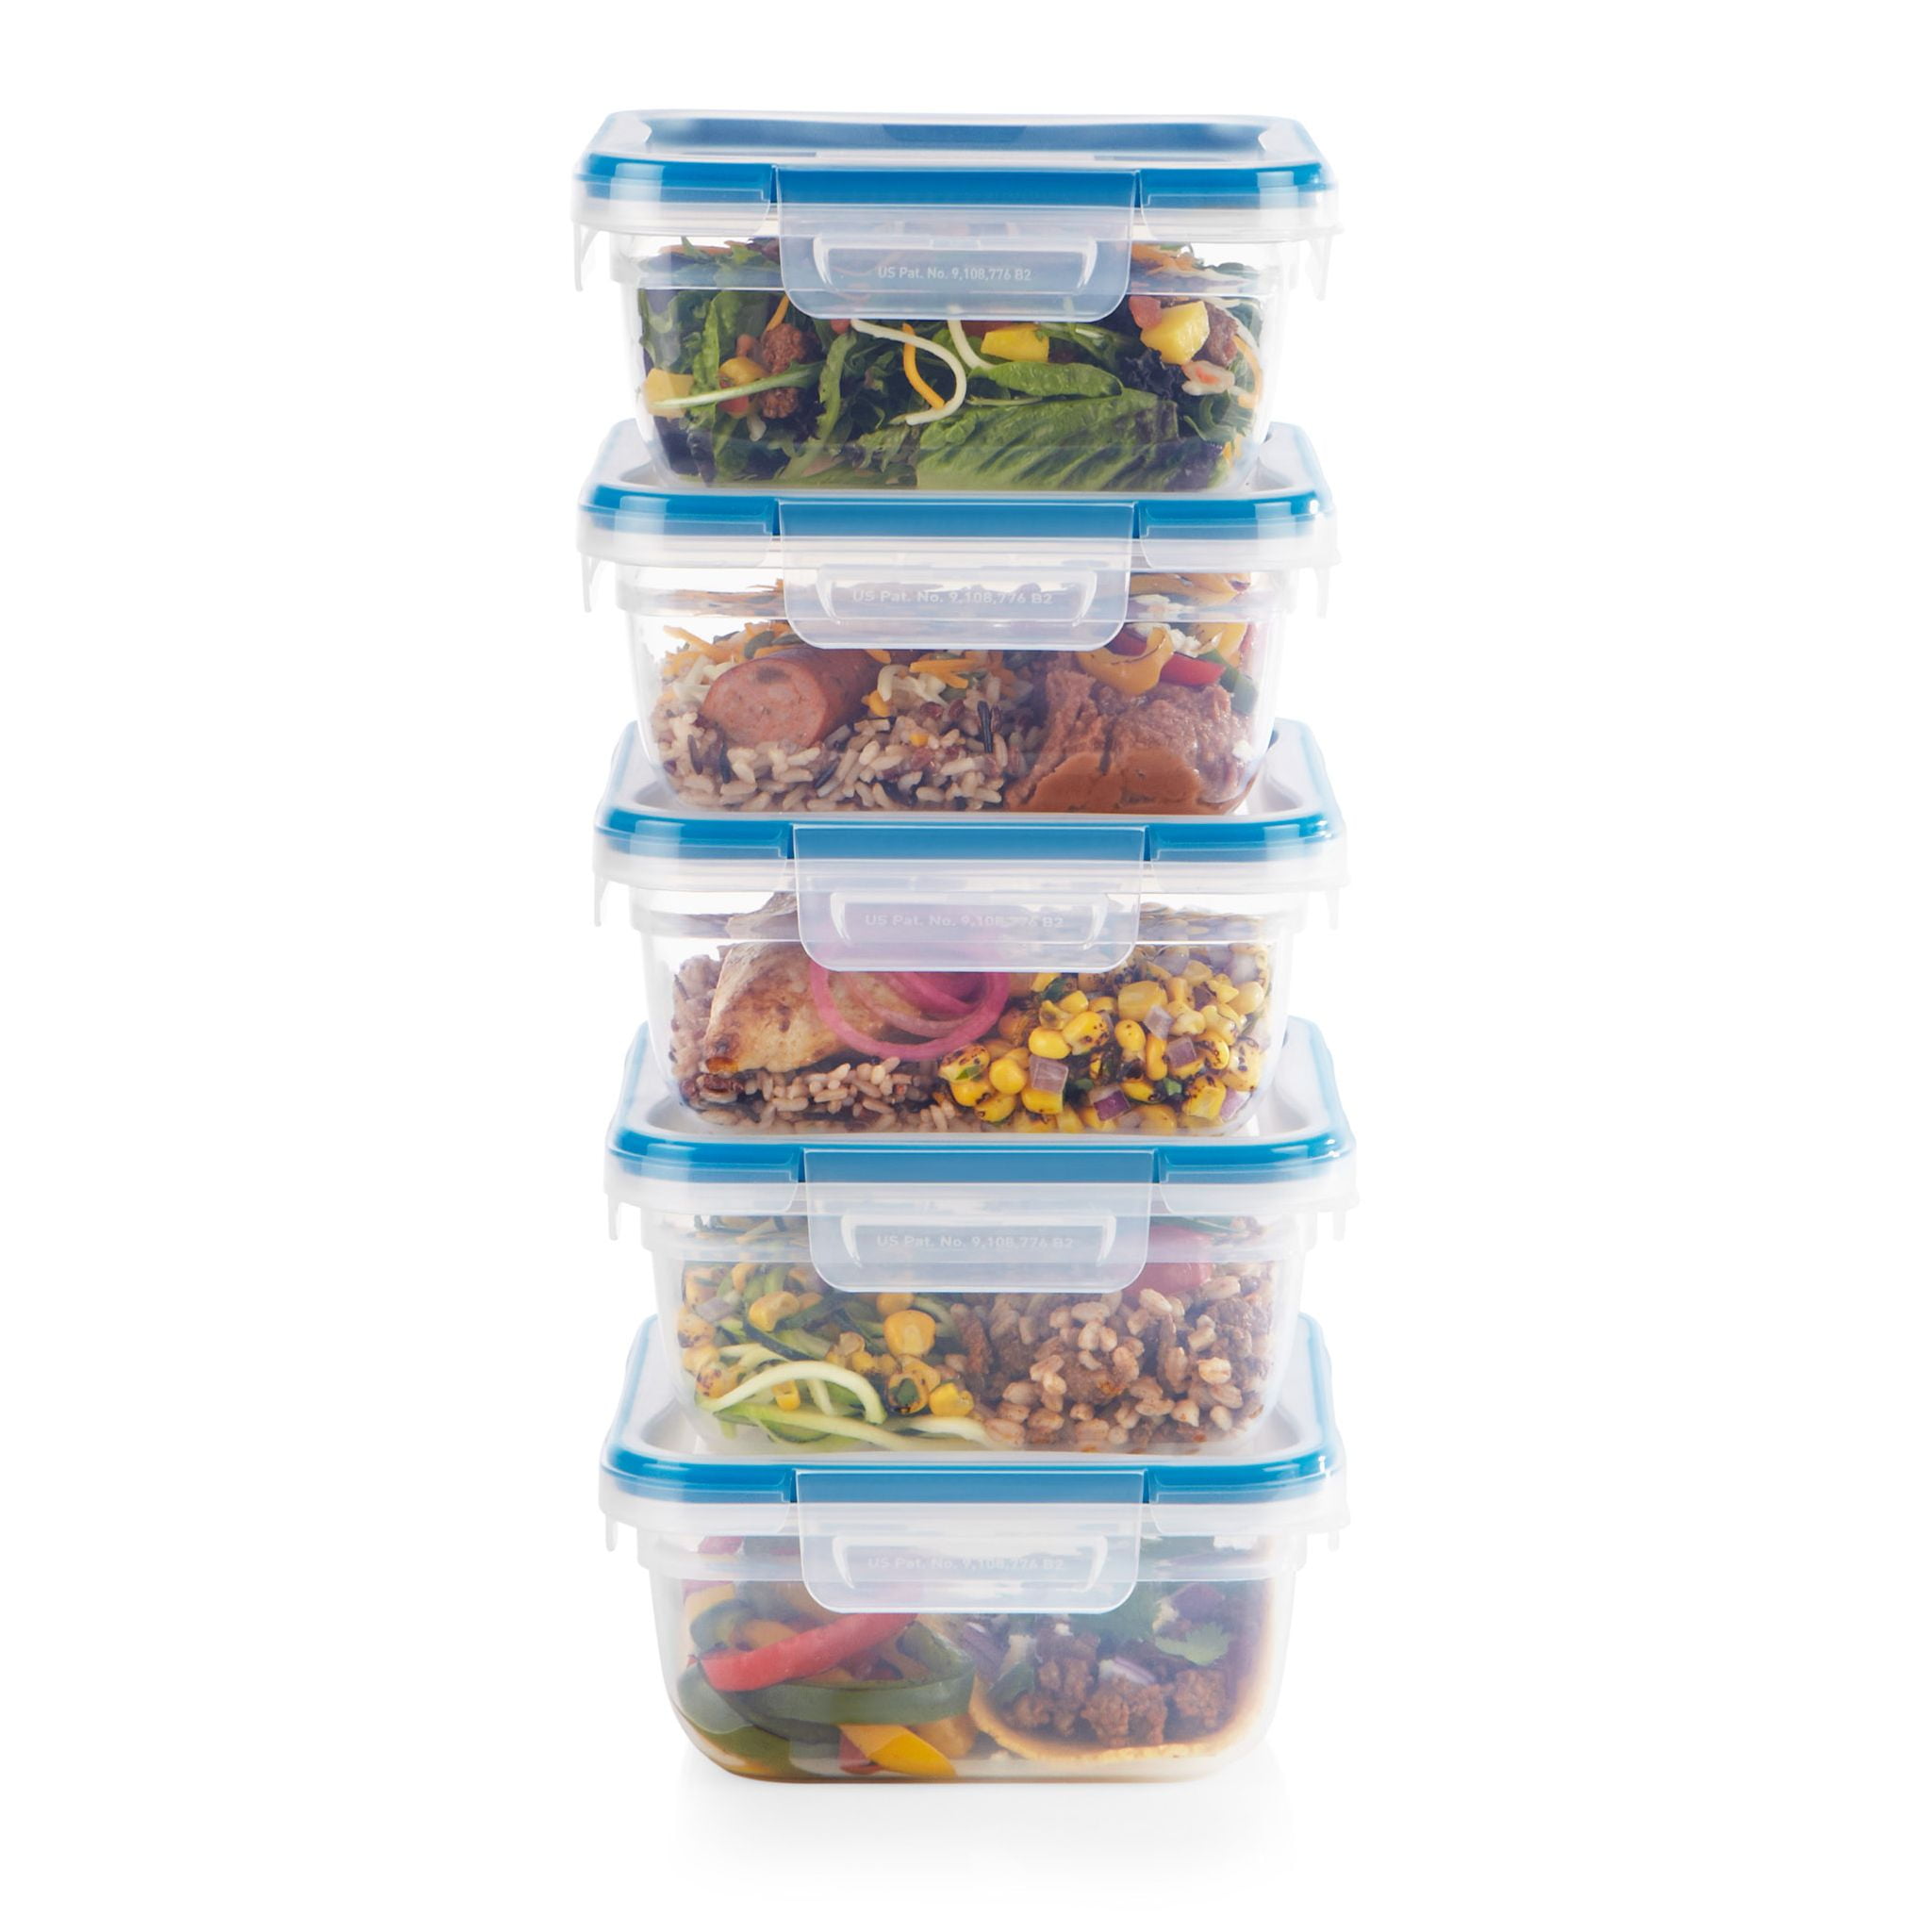 Snapware Total Solution 20-Pc Plastic Food Storage Containers Set, 8.5-Cup,  5.5-Cup, 4-Cup, 3-Cup, and 1.2-Cup Meal Prep Containers, BPA-Free Lids